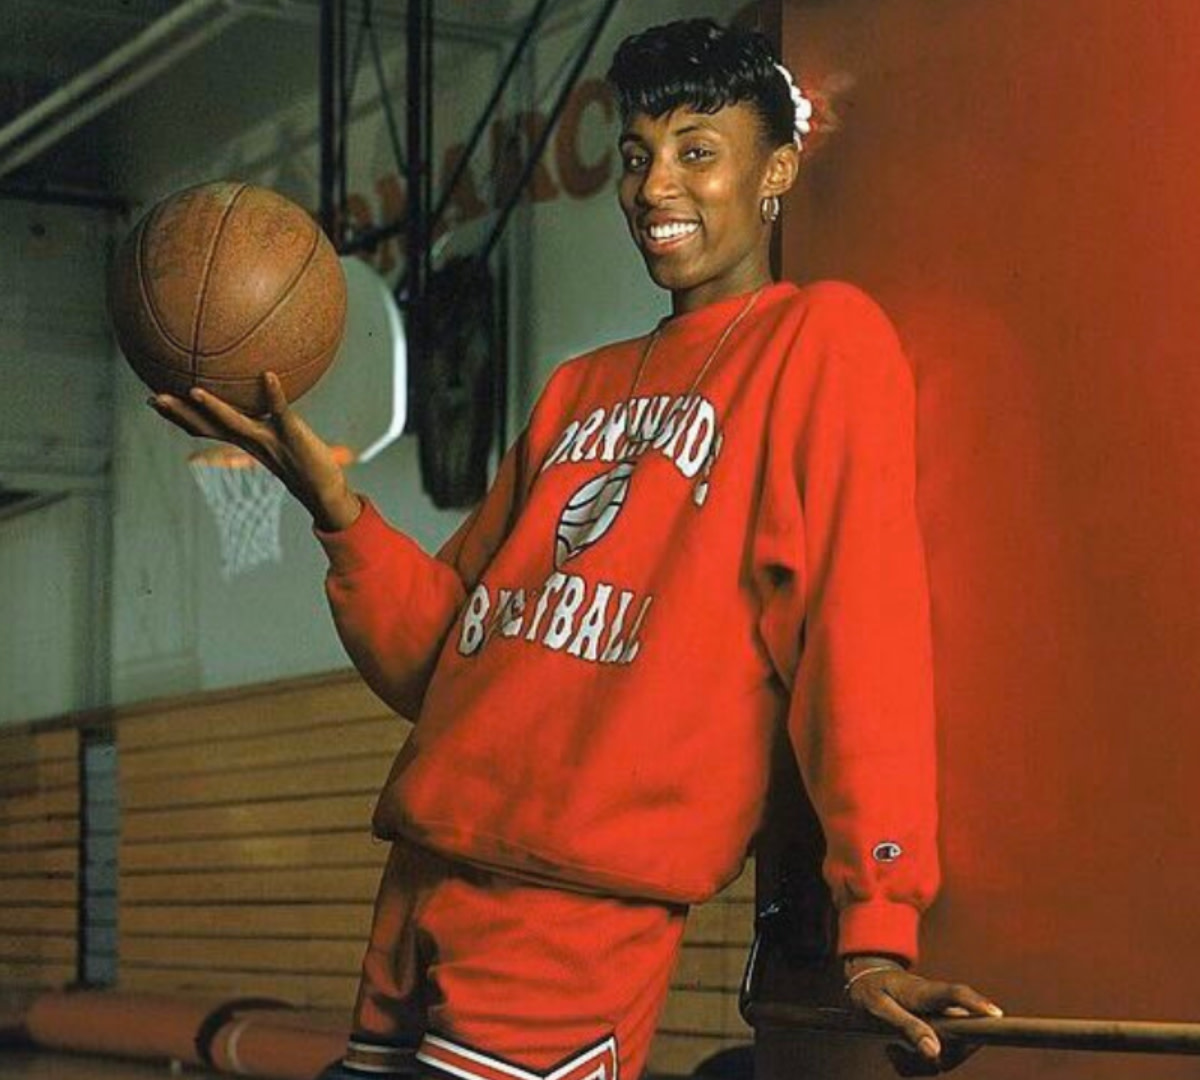 Hall Of Famer Lisa Leslie Once Scored 101 Points In Just 16 Minutes In High School And Made The Other Team Quit At Half Time